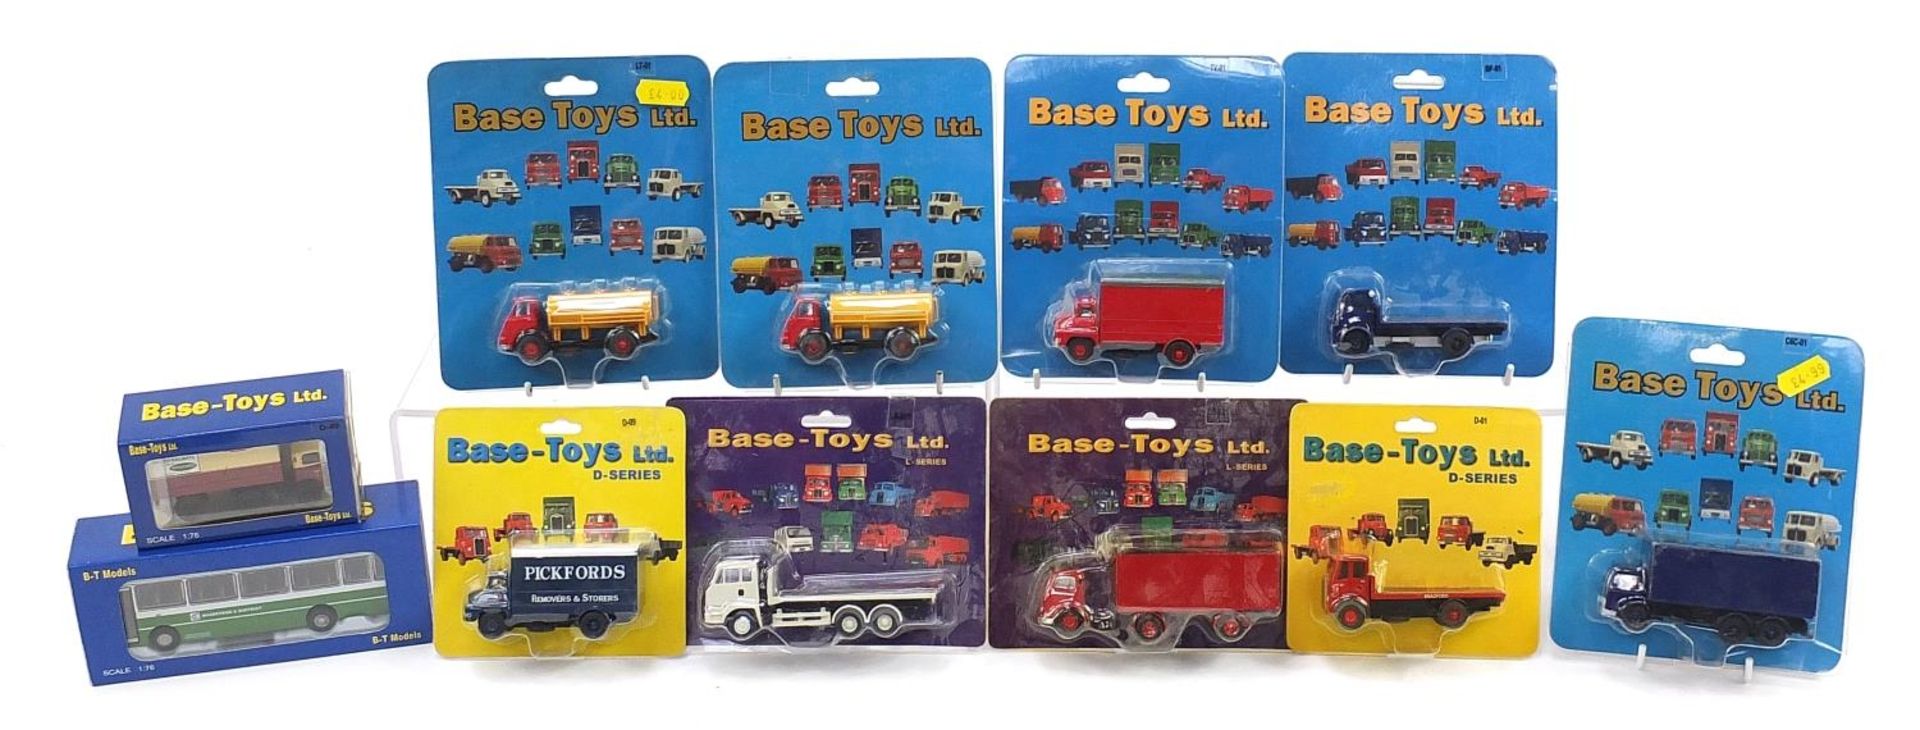 Collection of Base Toys diecast advertising vehicles with blister packs and boxes